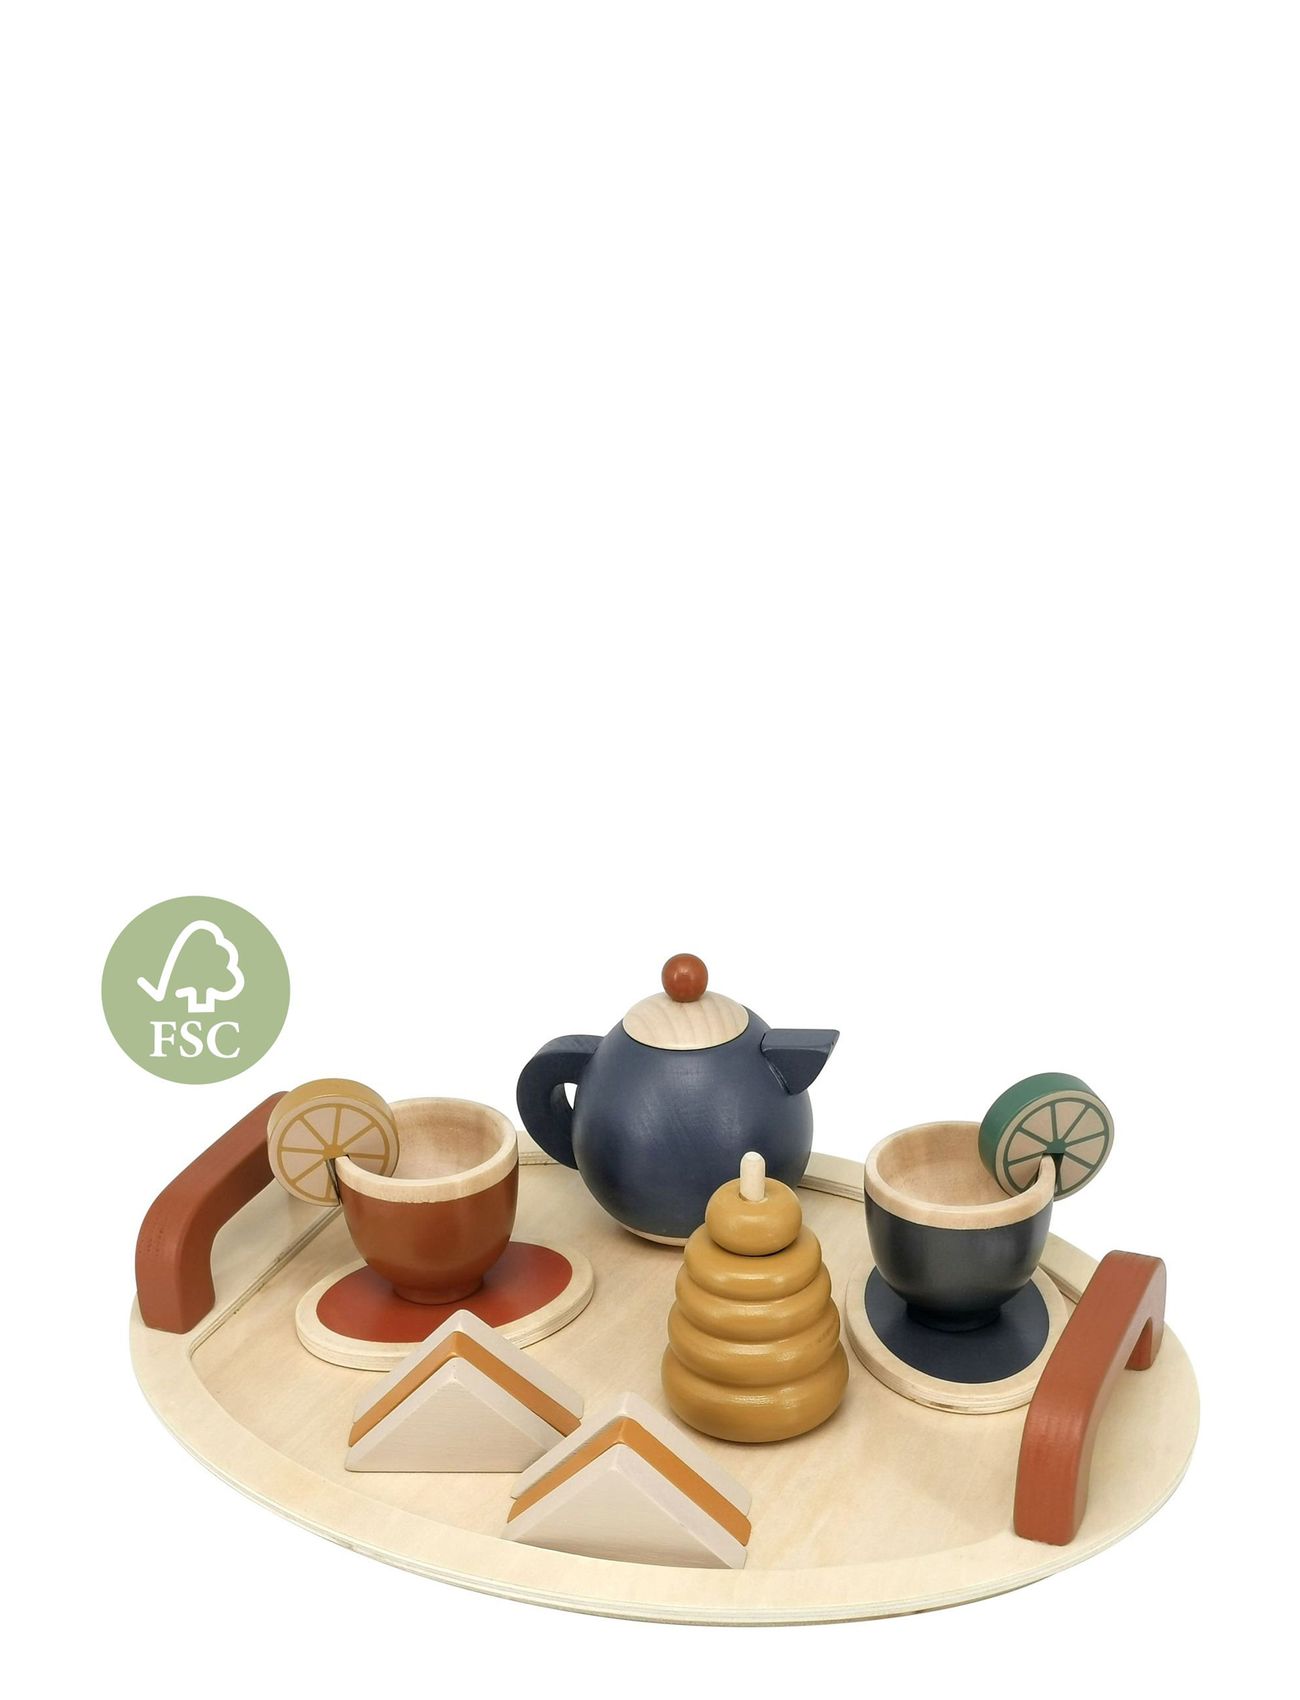 Tea Set With Tray In Fsc Wood Toys Toy Kitchen & Accessories Coffee & Tea Sets Multi/patterned Magni Toys